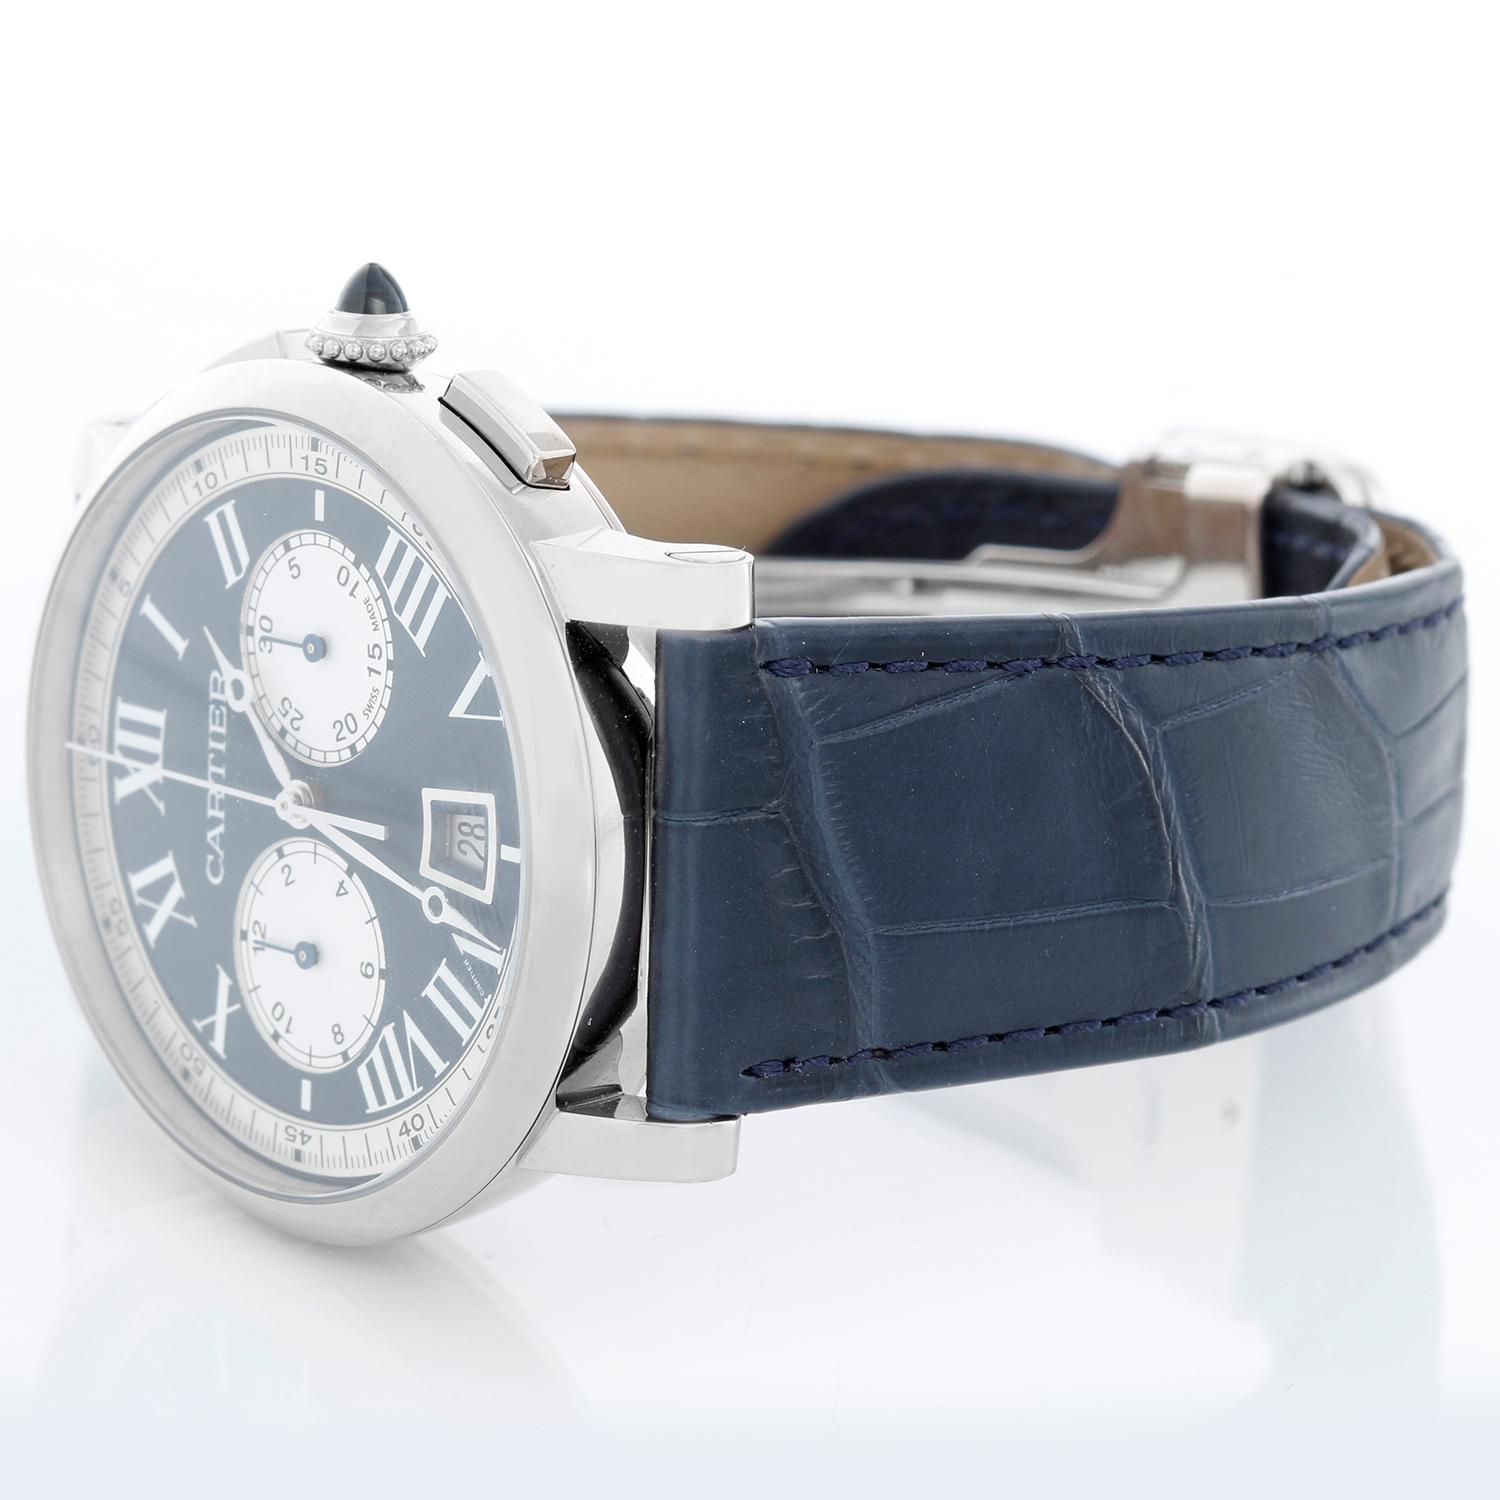 Cartier Rotonde De Cartier Limited Edition White Gold Ref 3769 Watch - Self-winding; chronograph. 18K White gold case ( 40 mm ). Sunburst blue dial with luminous white Roman numerals; subdials at 6 and 12 o'clock. Cartier strap with 18K white gold